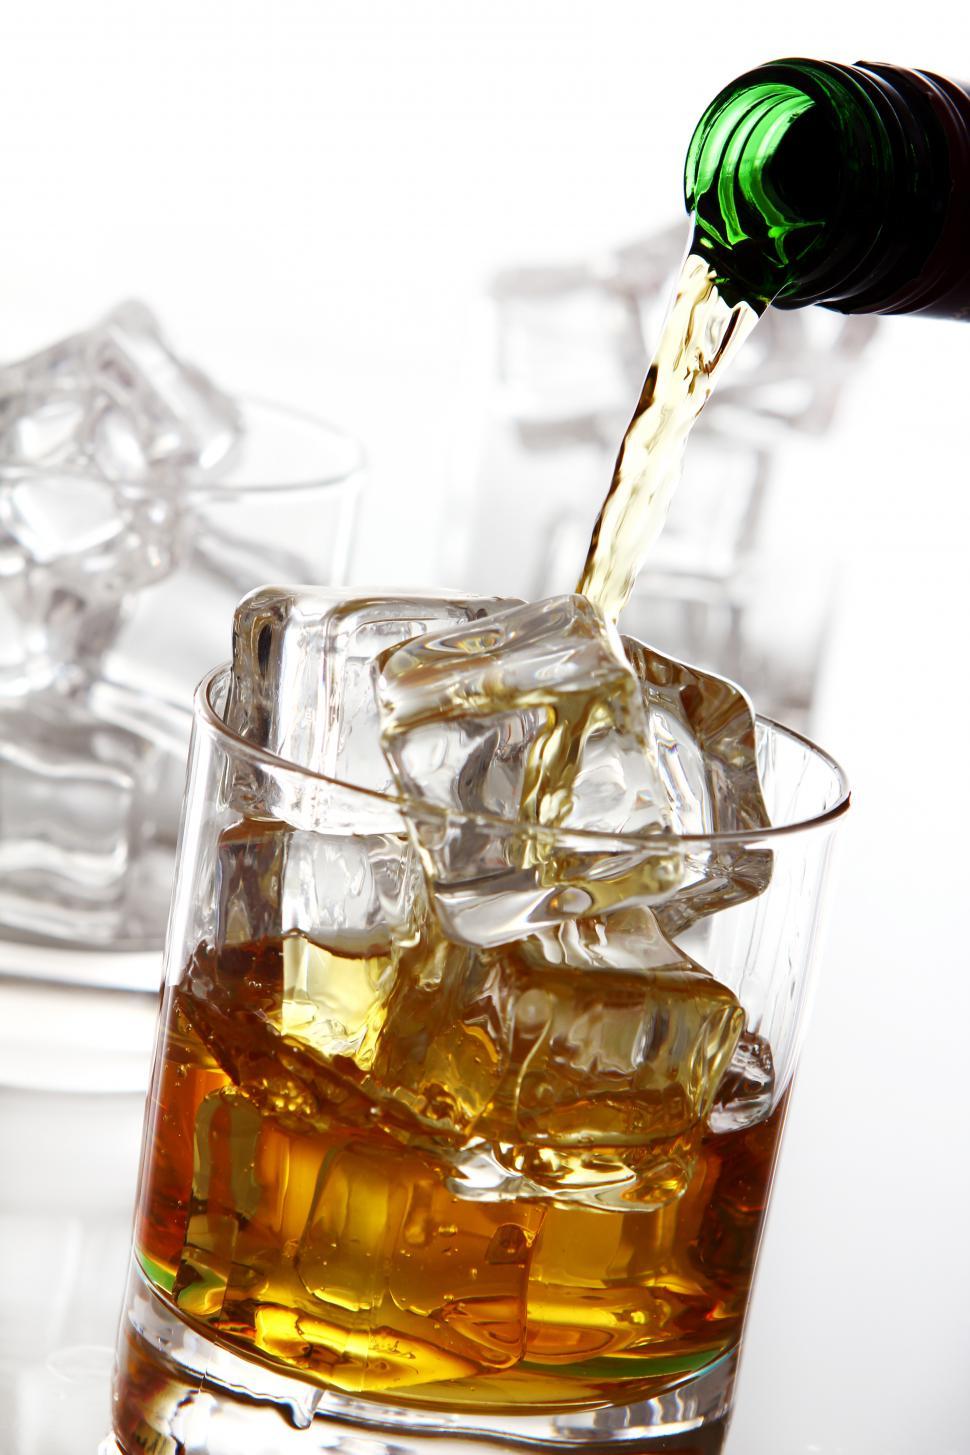 Free Image of Pouring whiskey over ice 